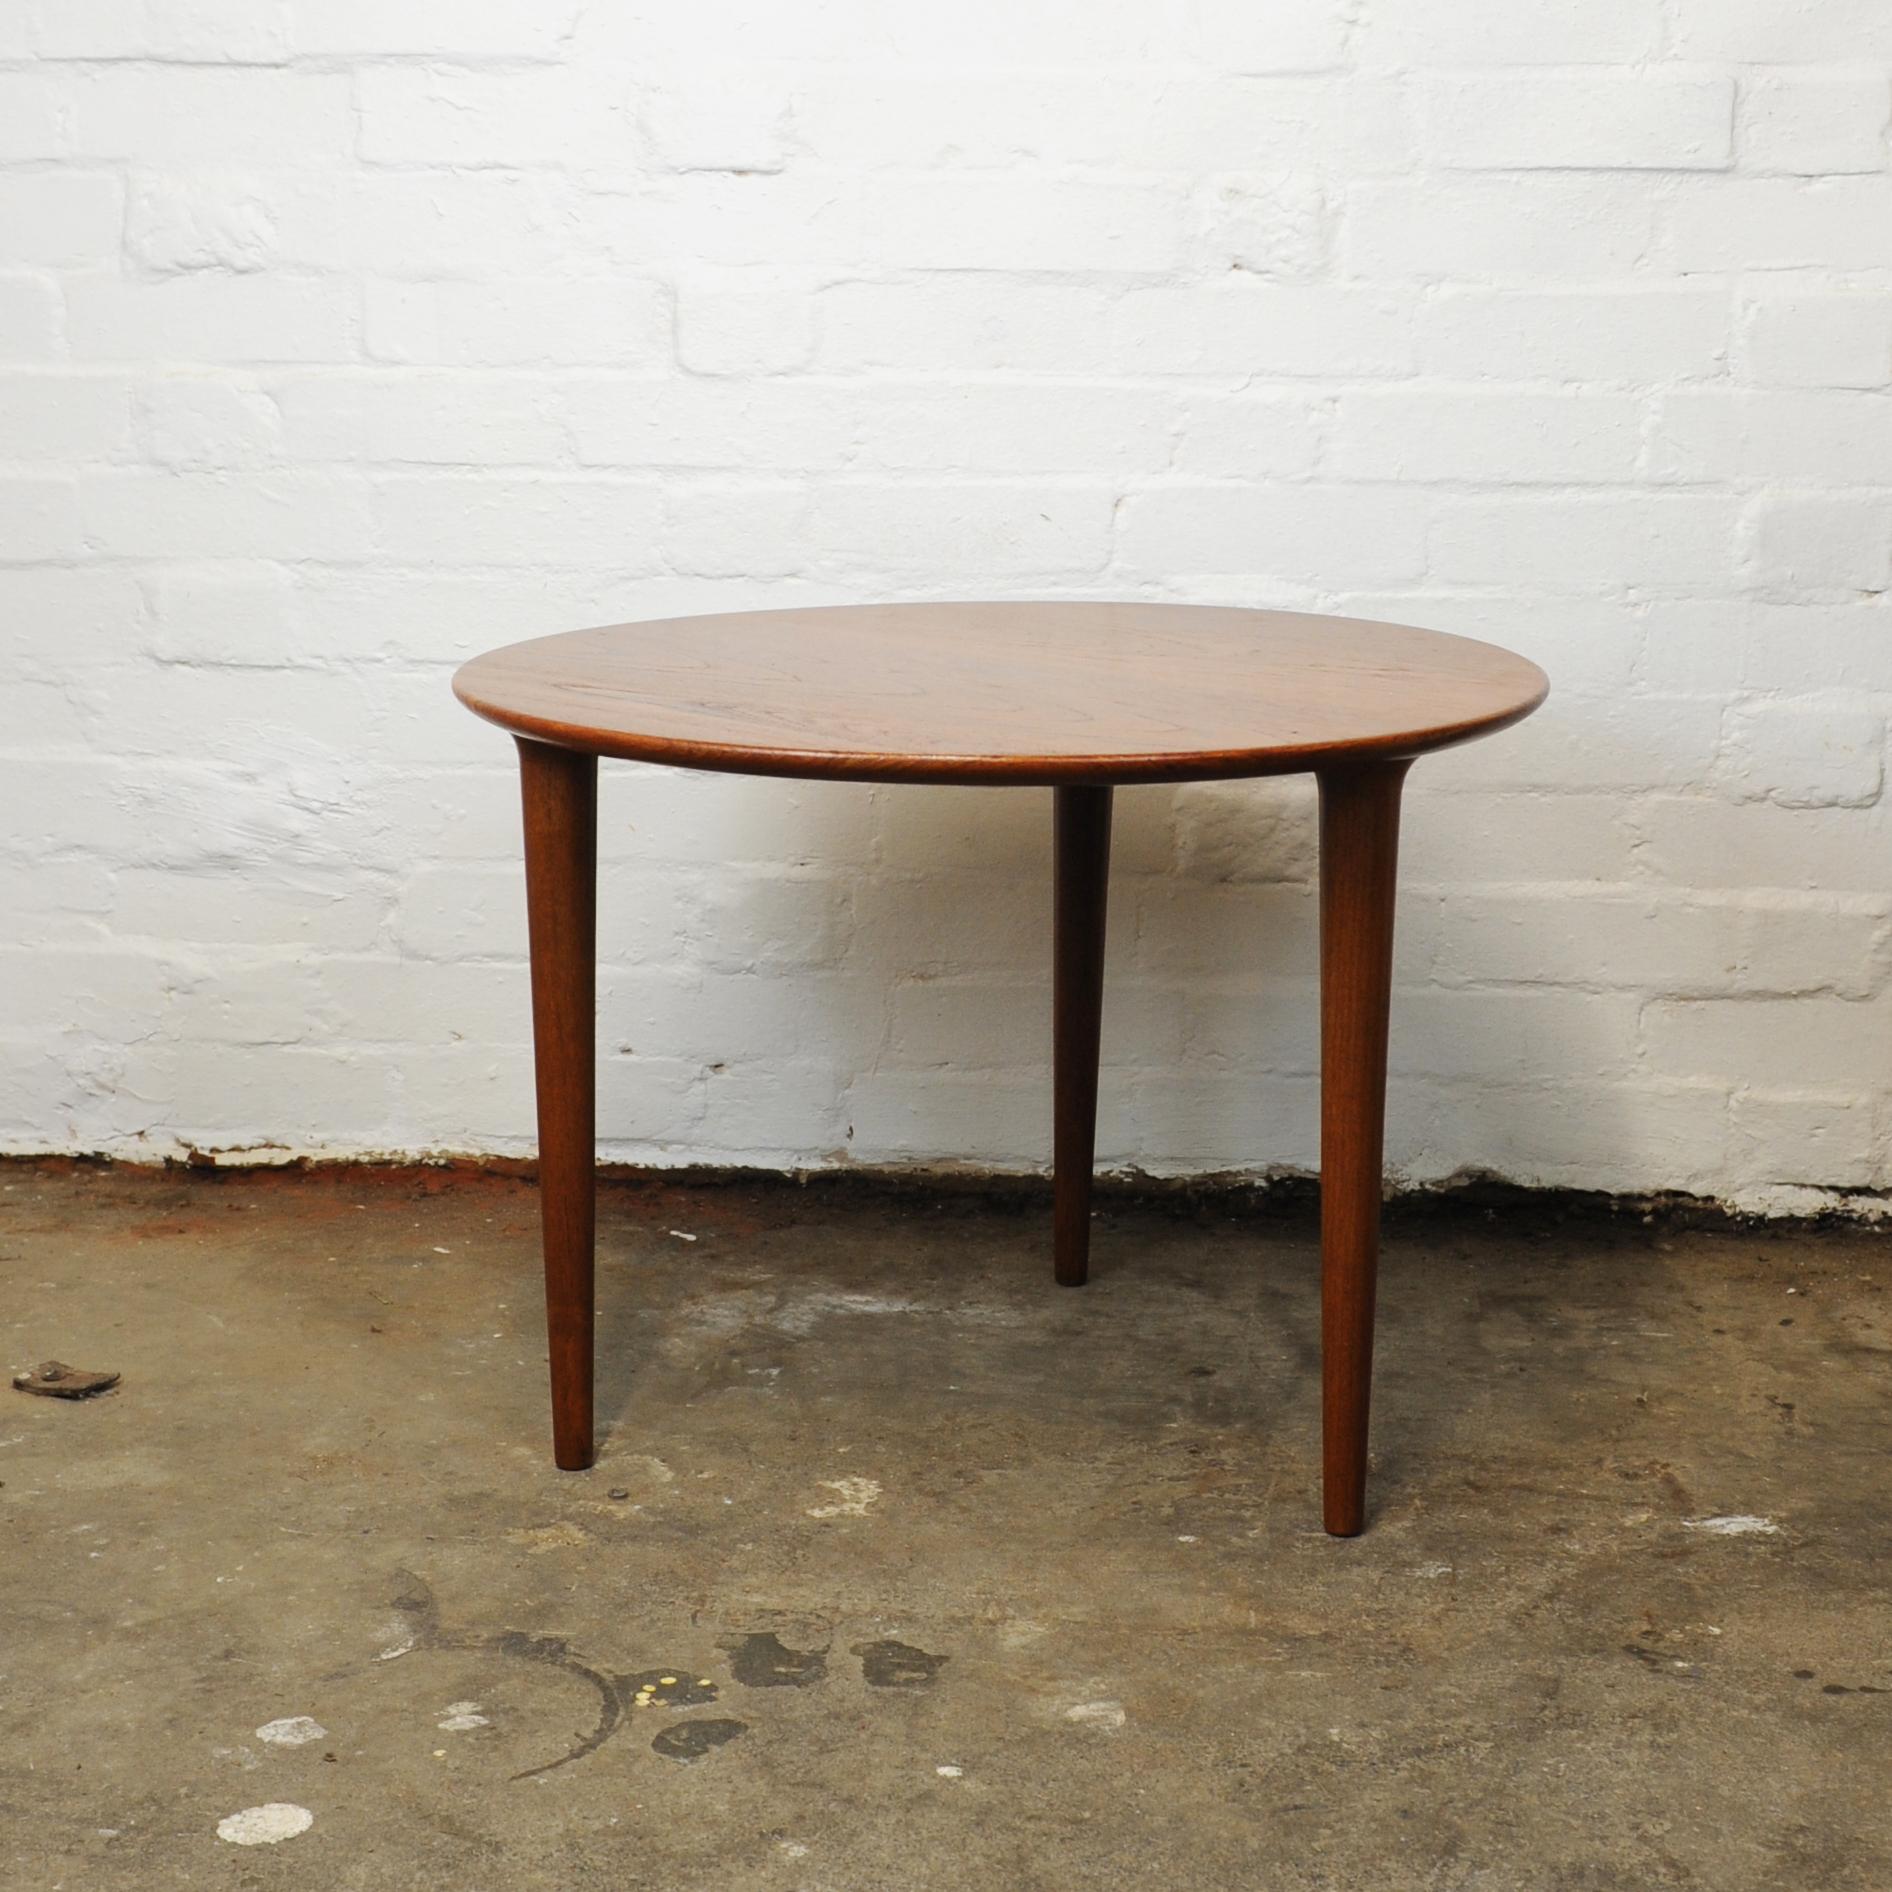 Norwegian Round Teak Three Legged Coffee Table by Norsk Design Ltd, 1960s For Sale